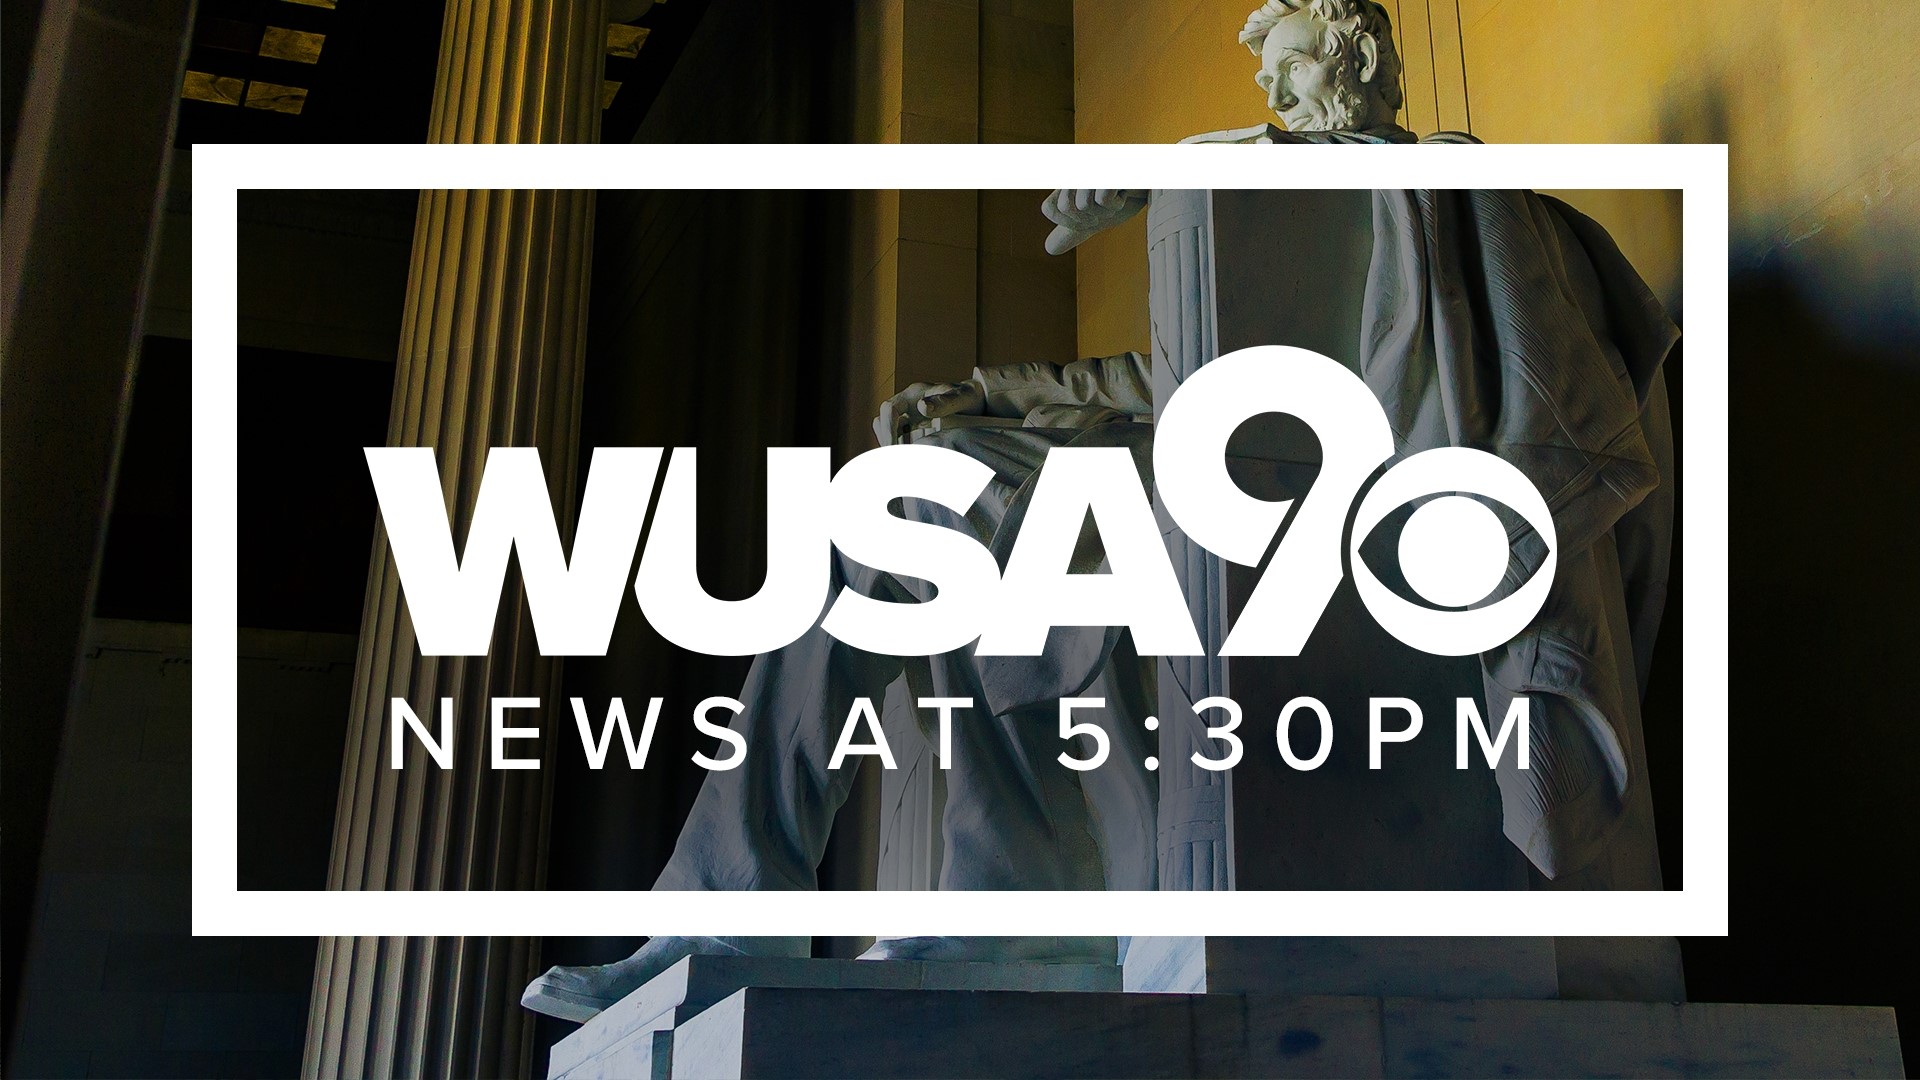 The WUSA9 News Team covers the day's major news and breaking stories affecting the Washington, D.C., area, with sports and the week's weather forecast.